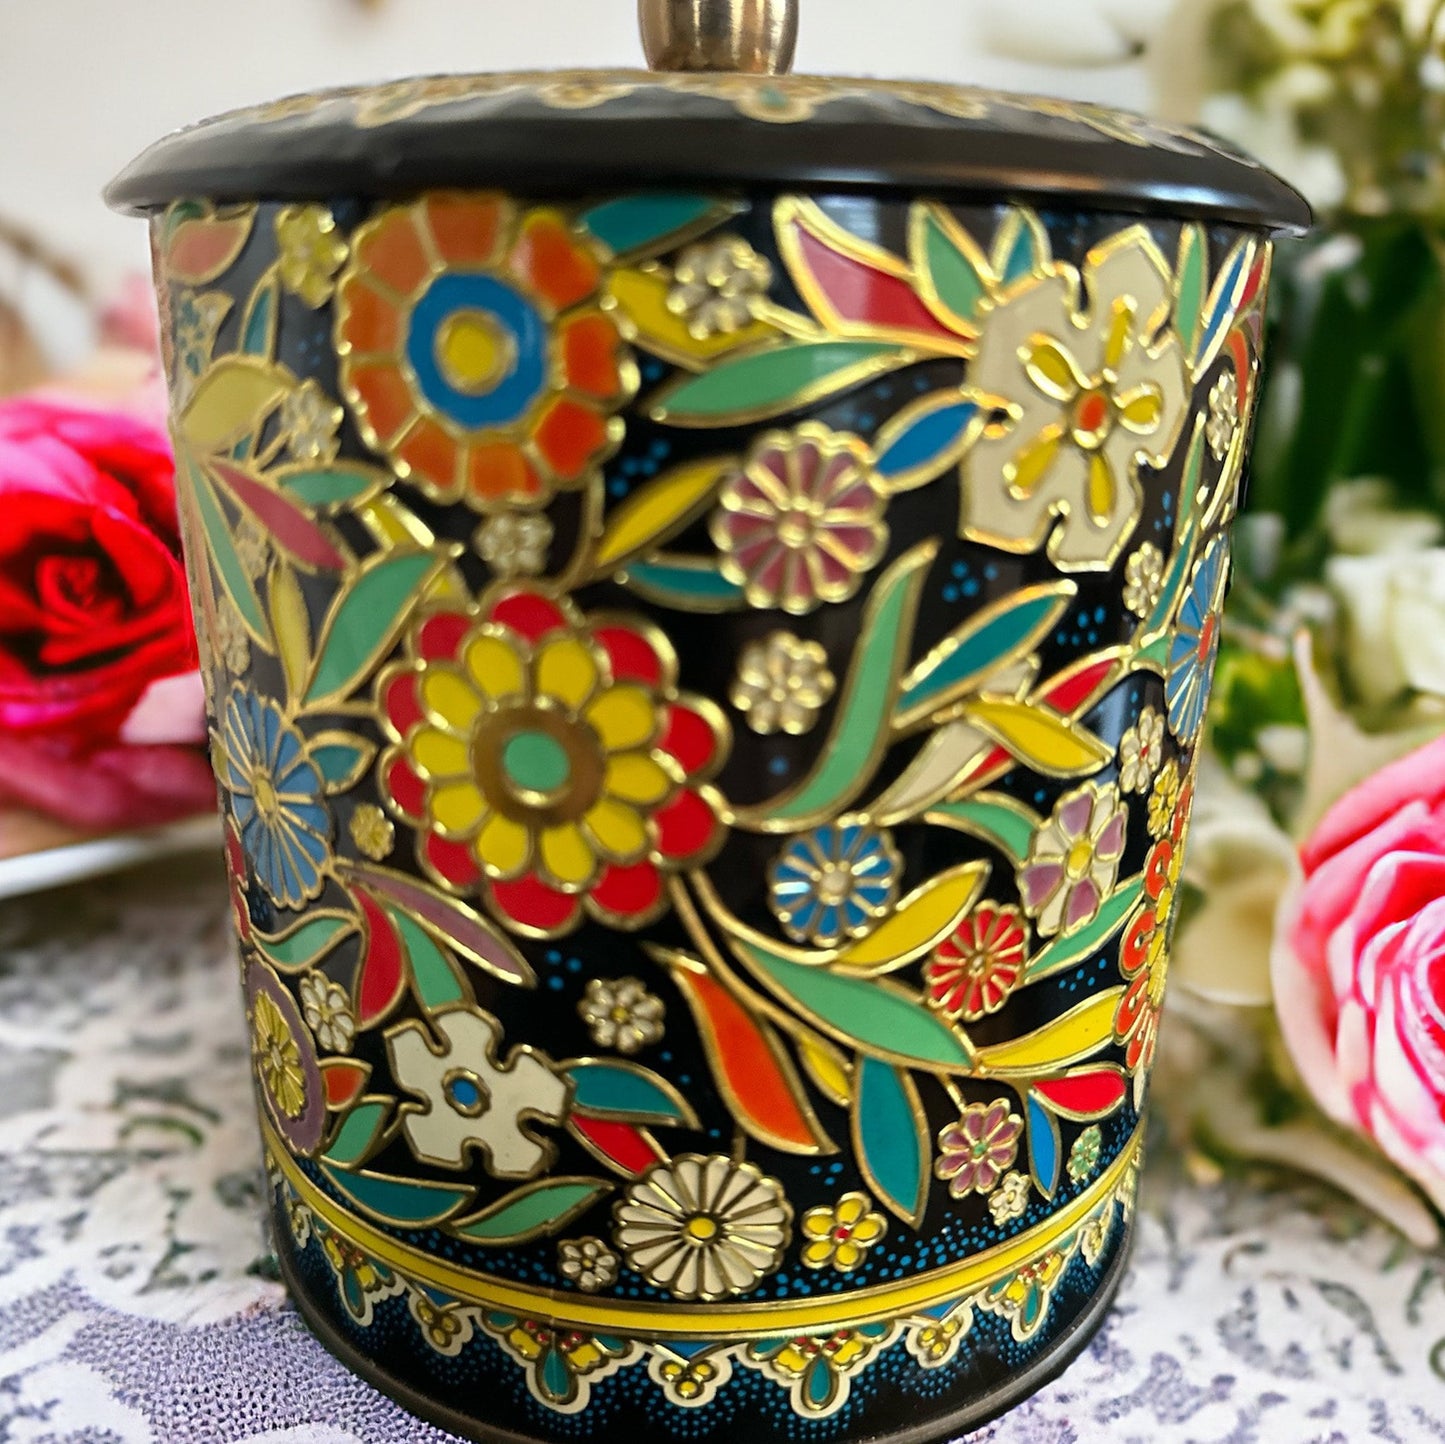 Scented Soy Candle, Vintage Tins, Gift For Mom, Spring Decor